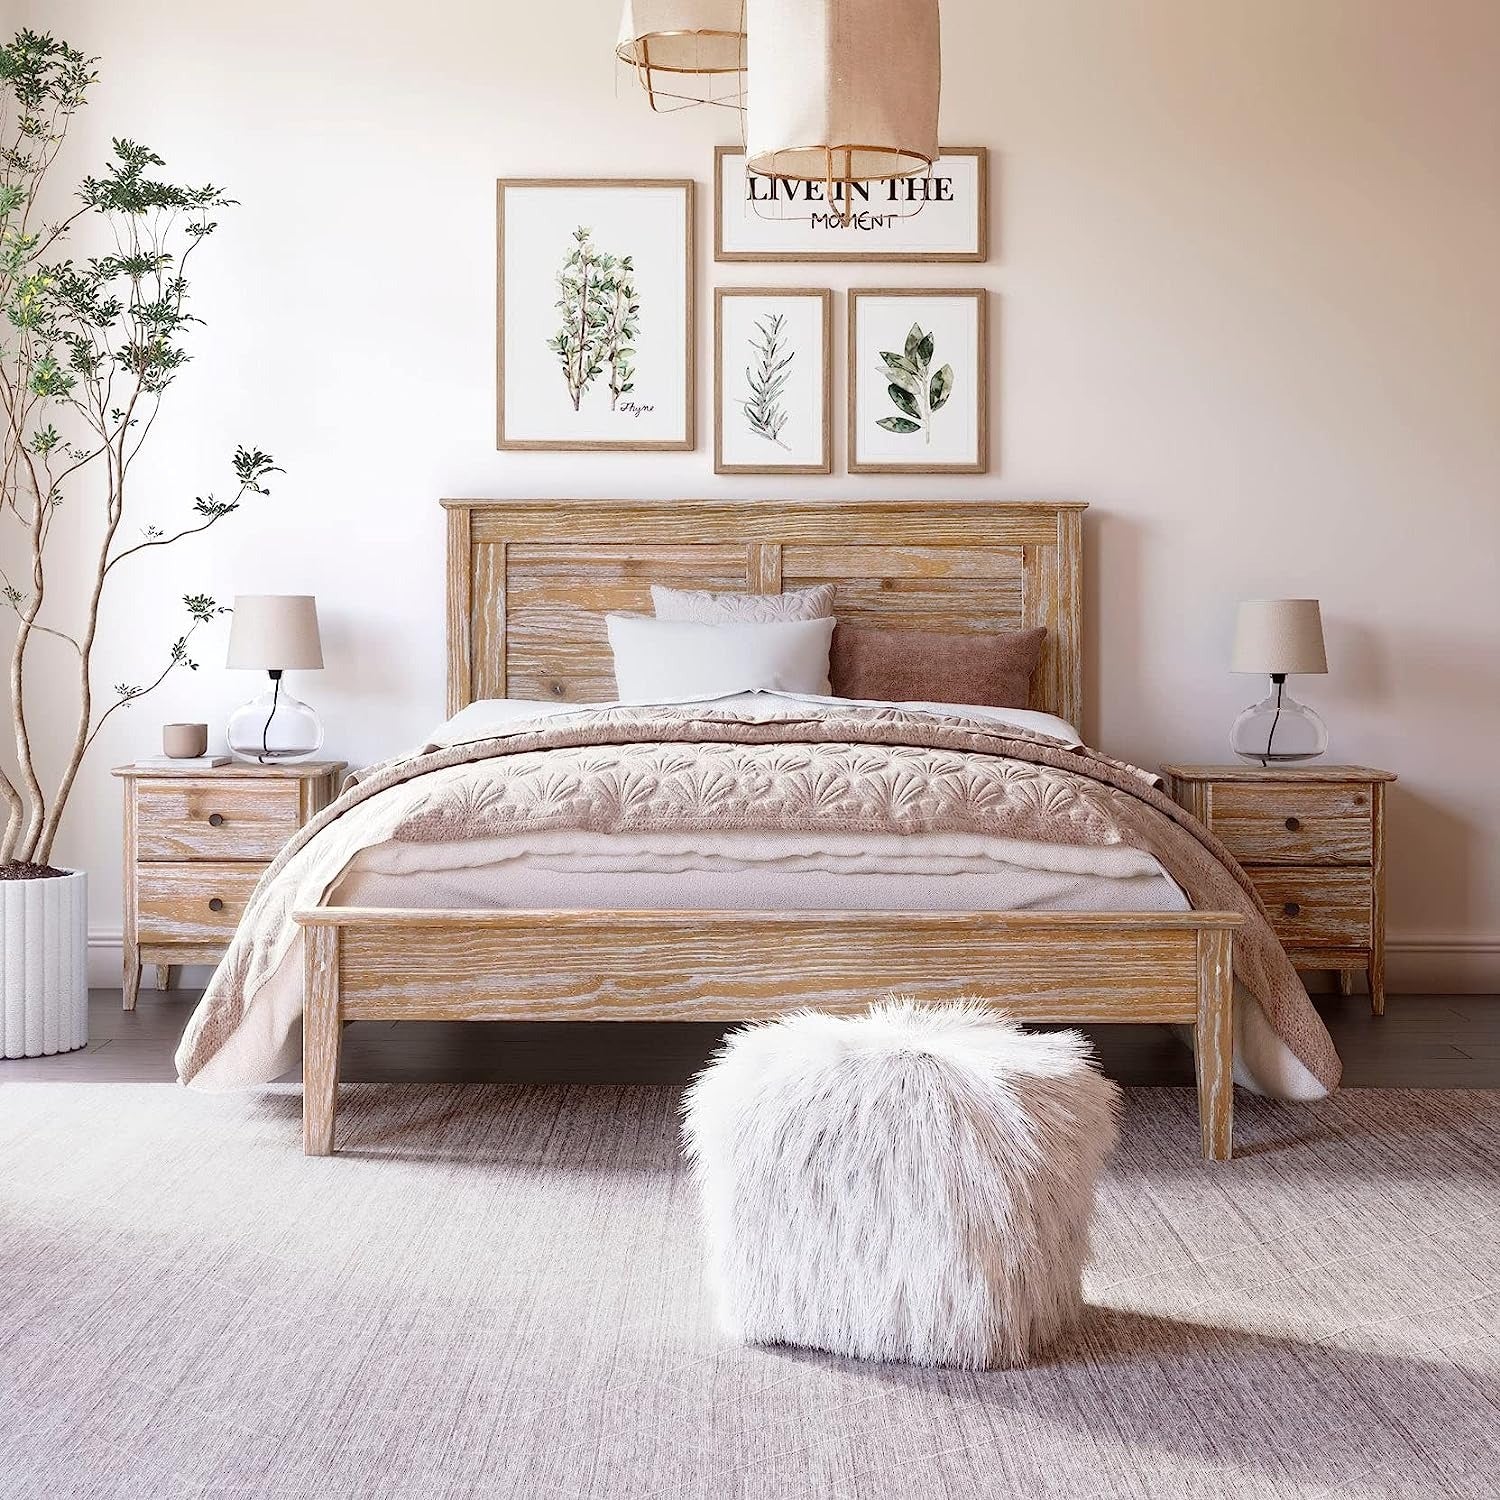 How to Design a Farmhouse Style Bedroom